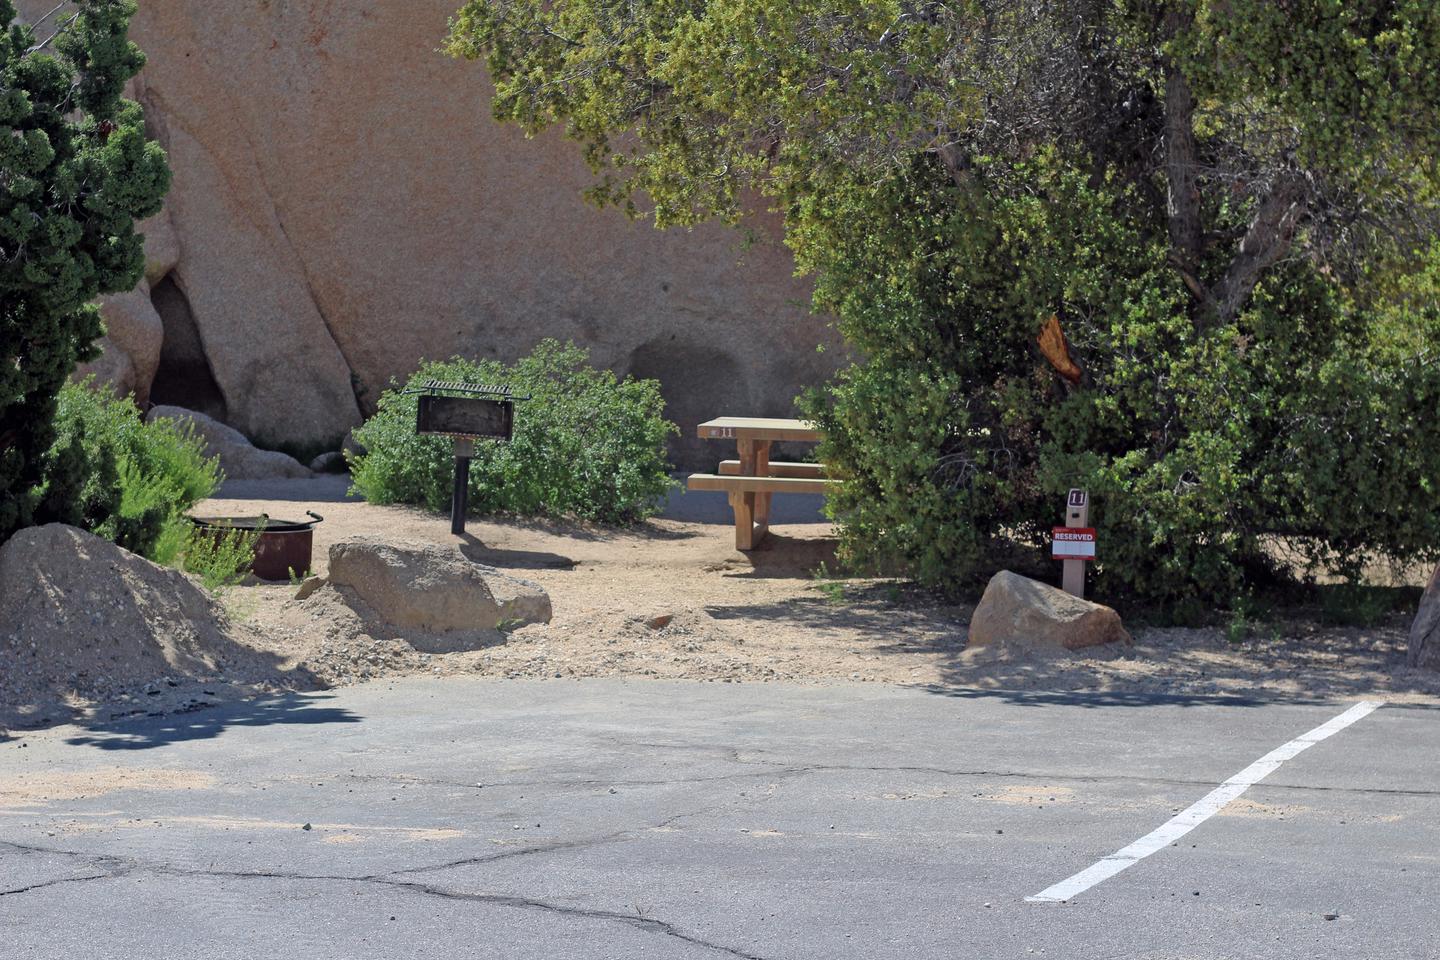 Campsite  with picnic table surrounded by boulders and green plants.Campsite.
